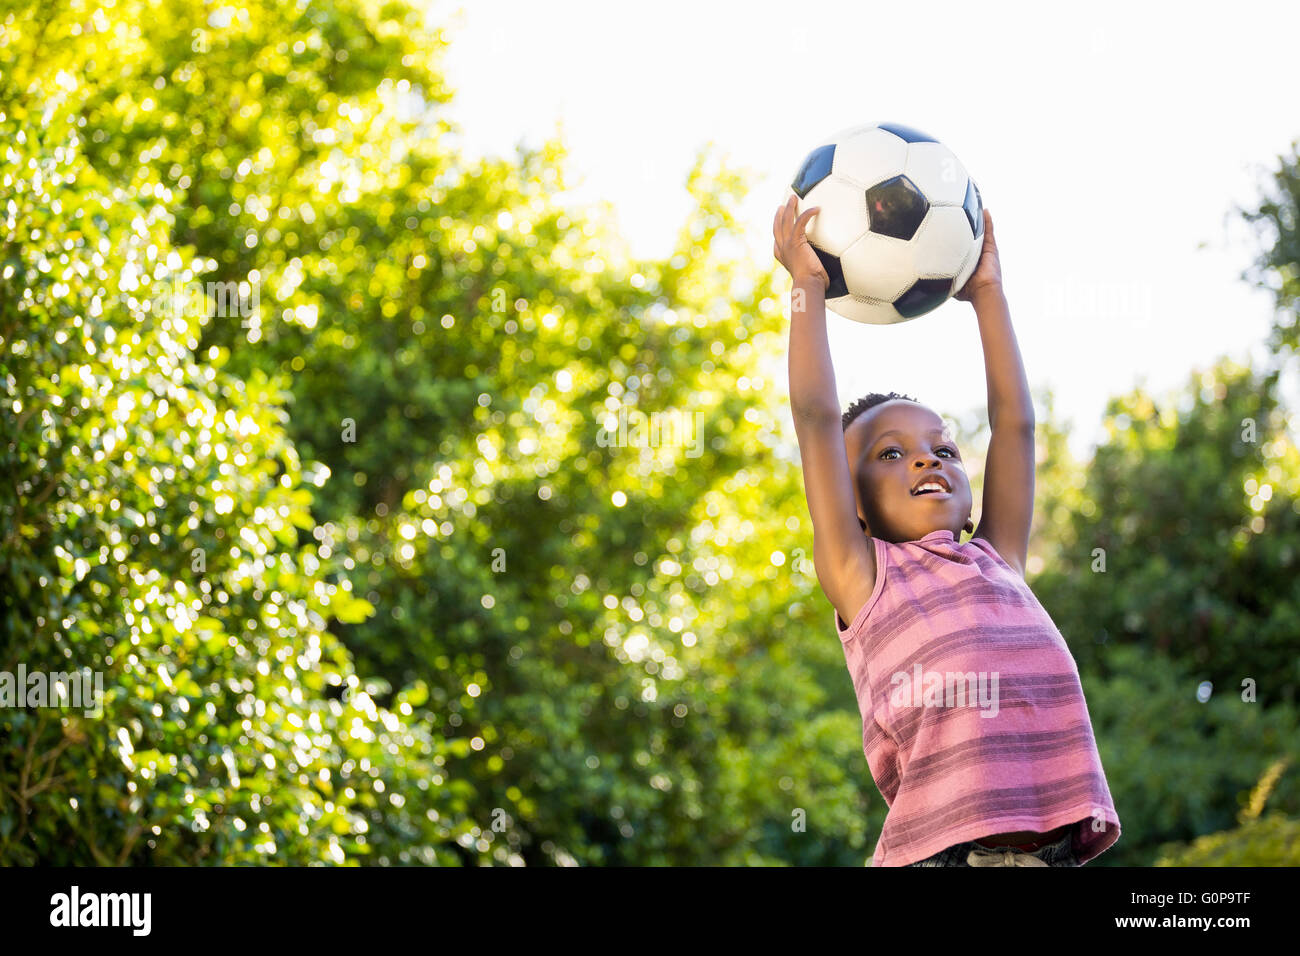 Boy is catching a soccer ball Stock Photo